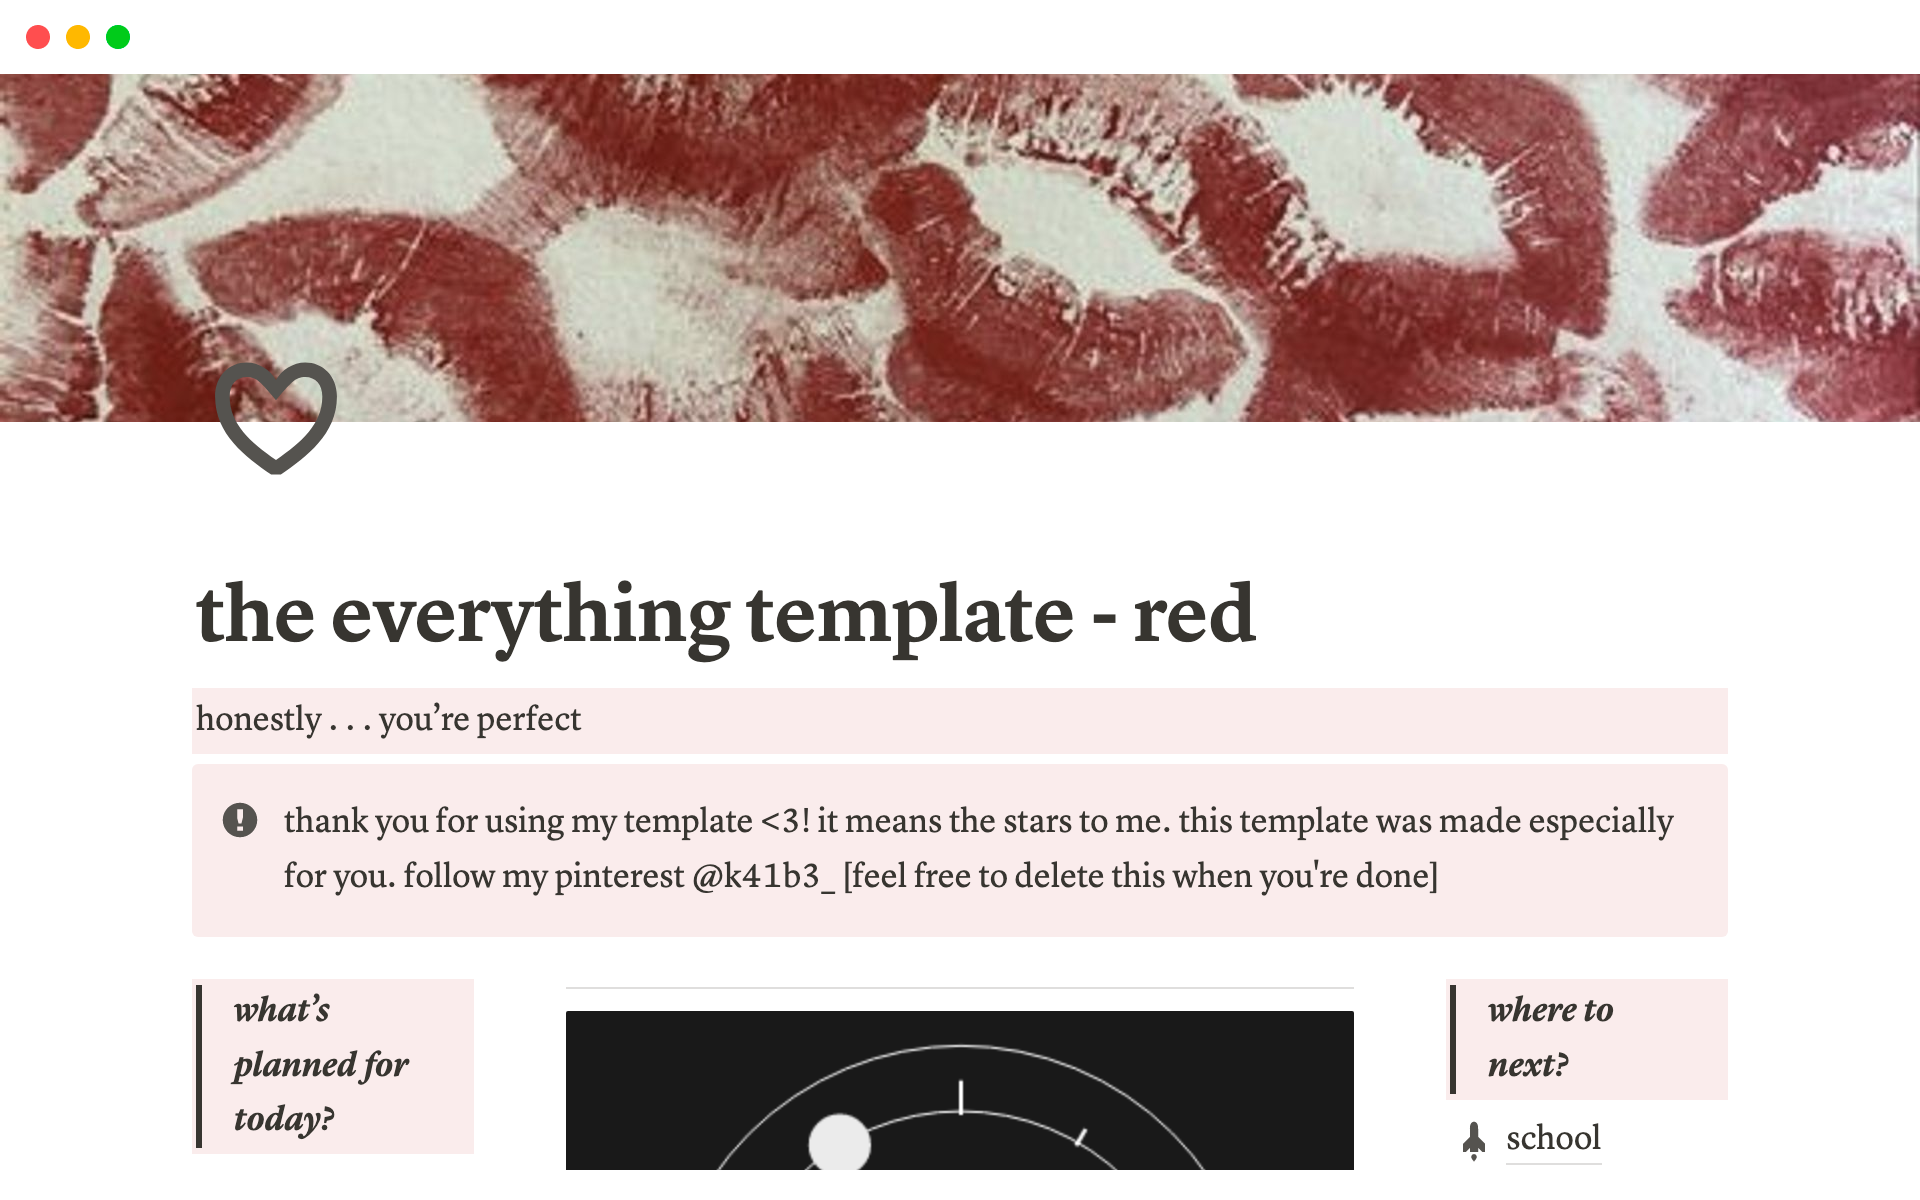 A template preview for The Everything Template - red